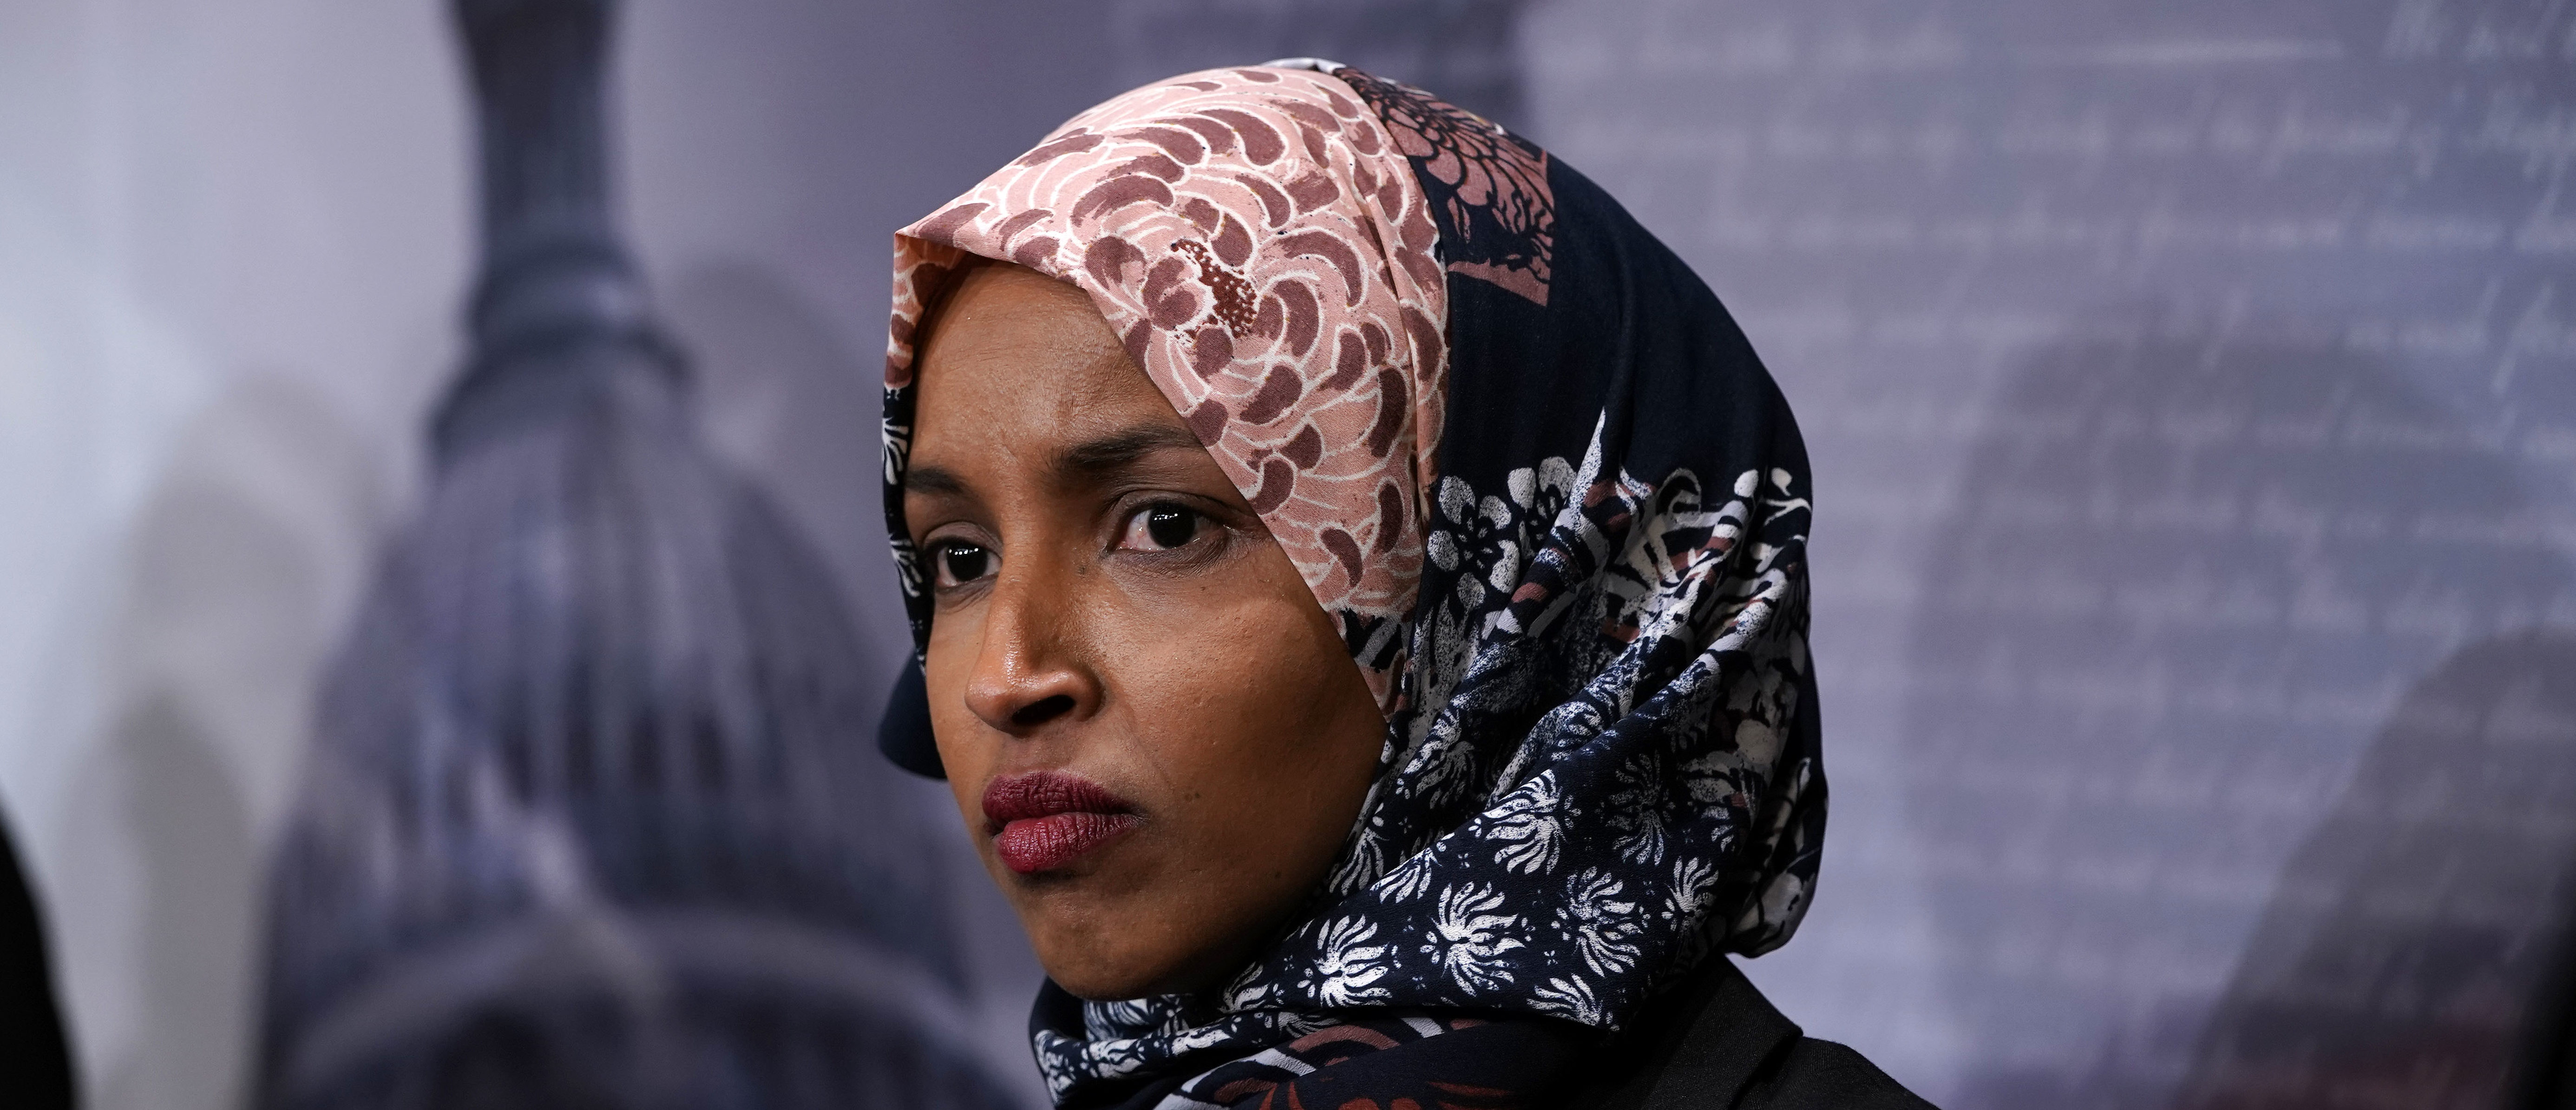 U.S. Rep. Ilhan Omar (D-MN) listens during a news conference on prescription drugs January 10, 2019 at the Capitol in Washington, DC. (Alex Wong/Getty Images)